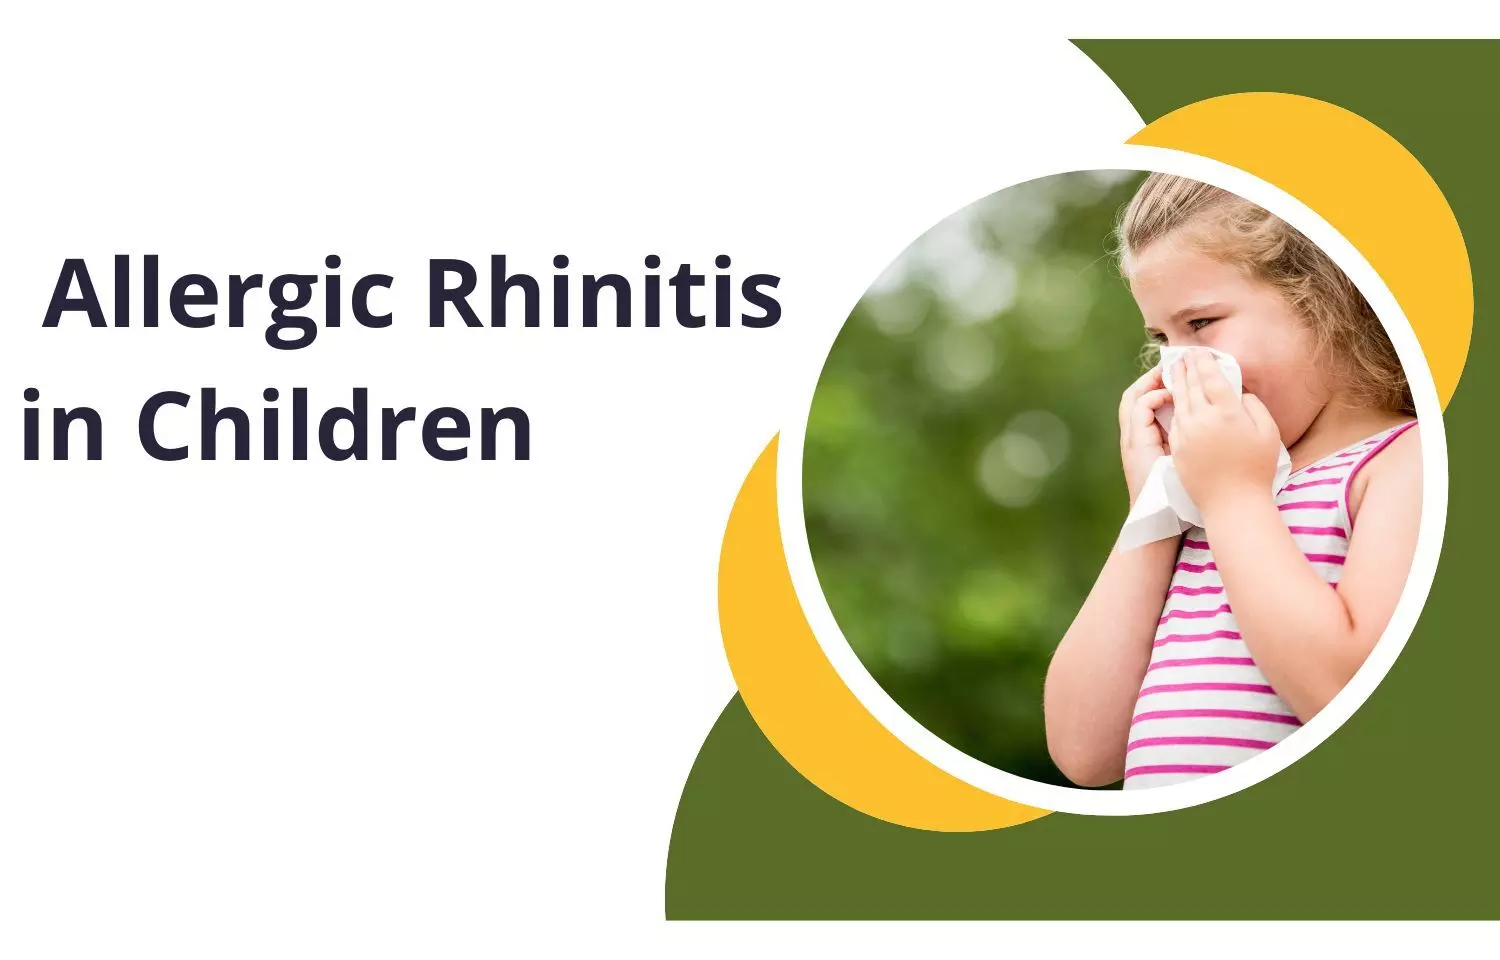 Allergic Rhinitis in Children: Practitioners Update and Consideration for Use of Intranasal Fluticasone Based Therapies